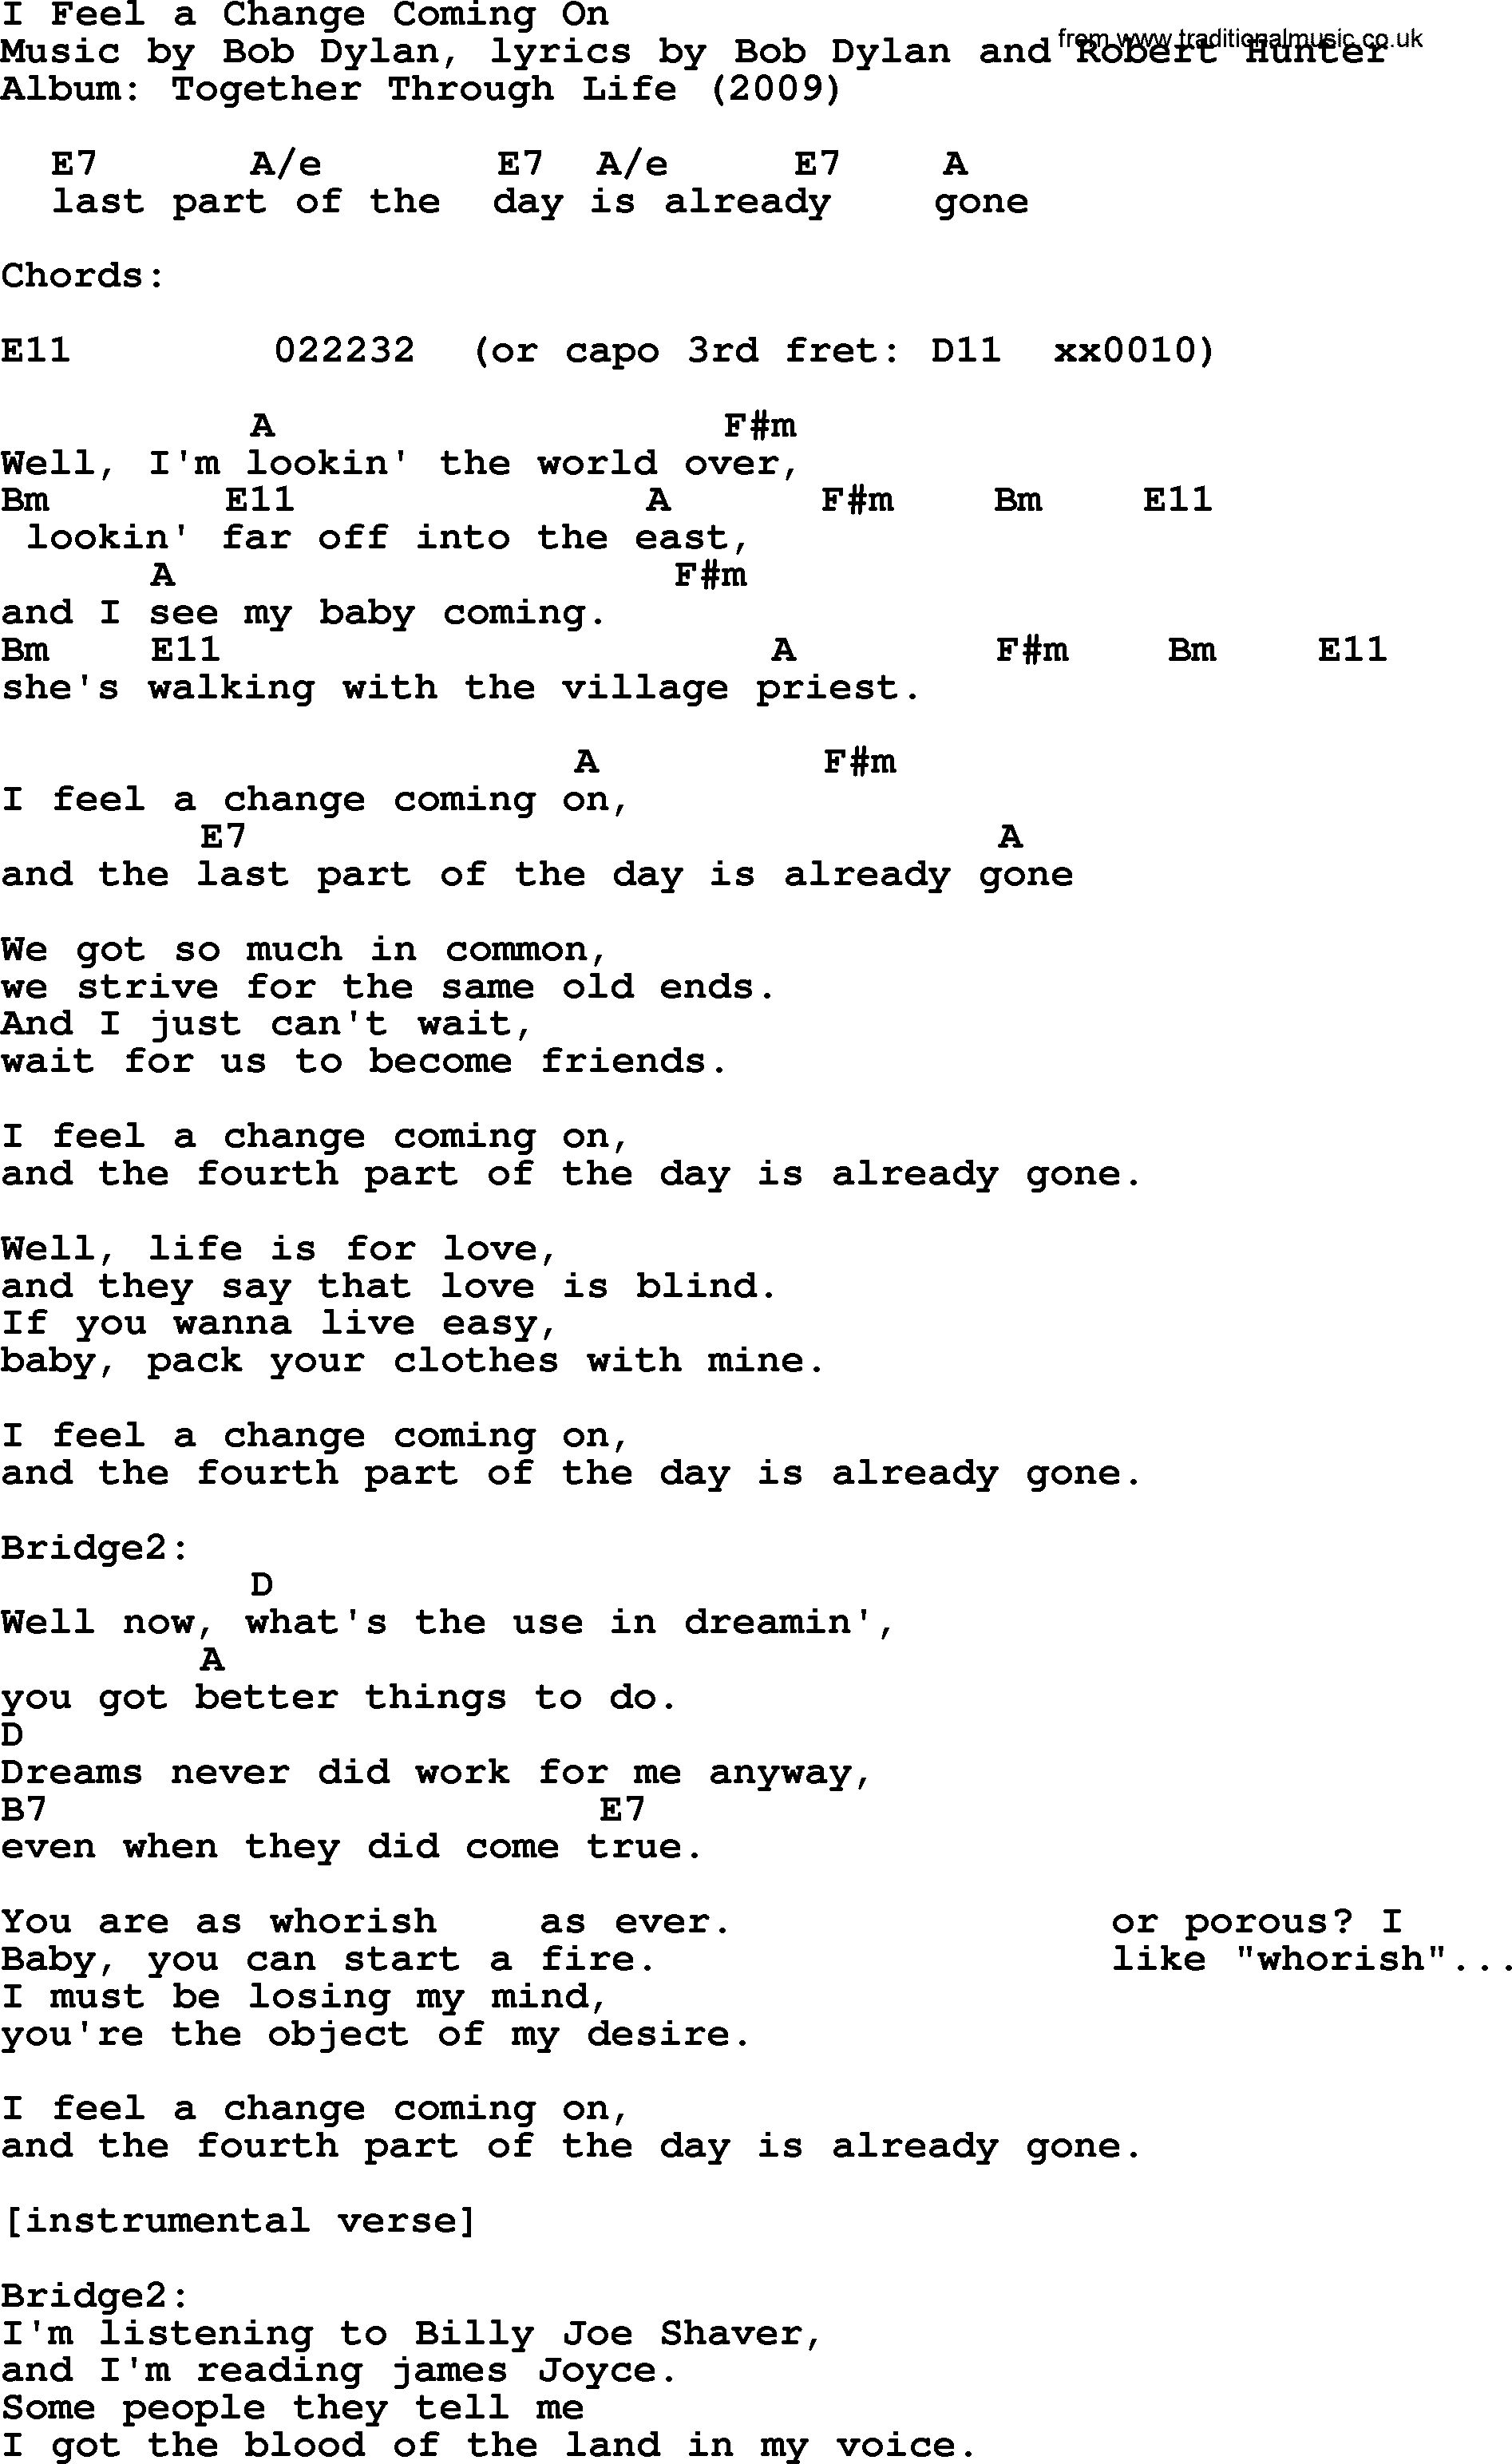 Bob Dylan song, lyrics with chords - I Feel a Change Coming On